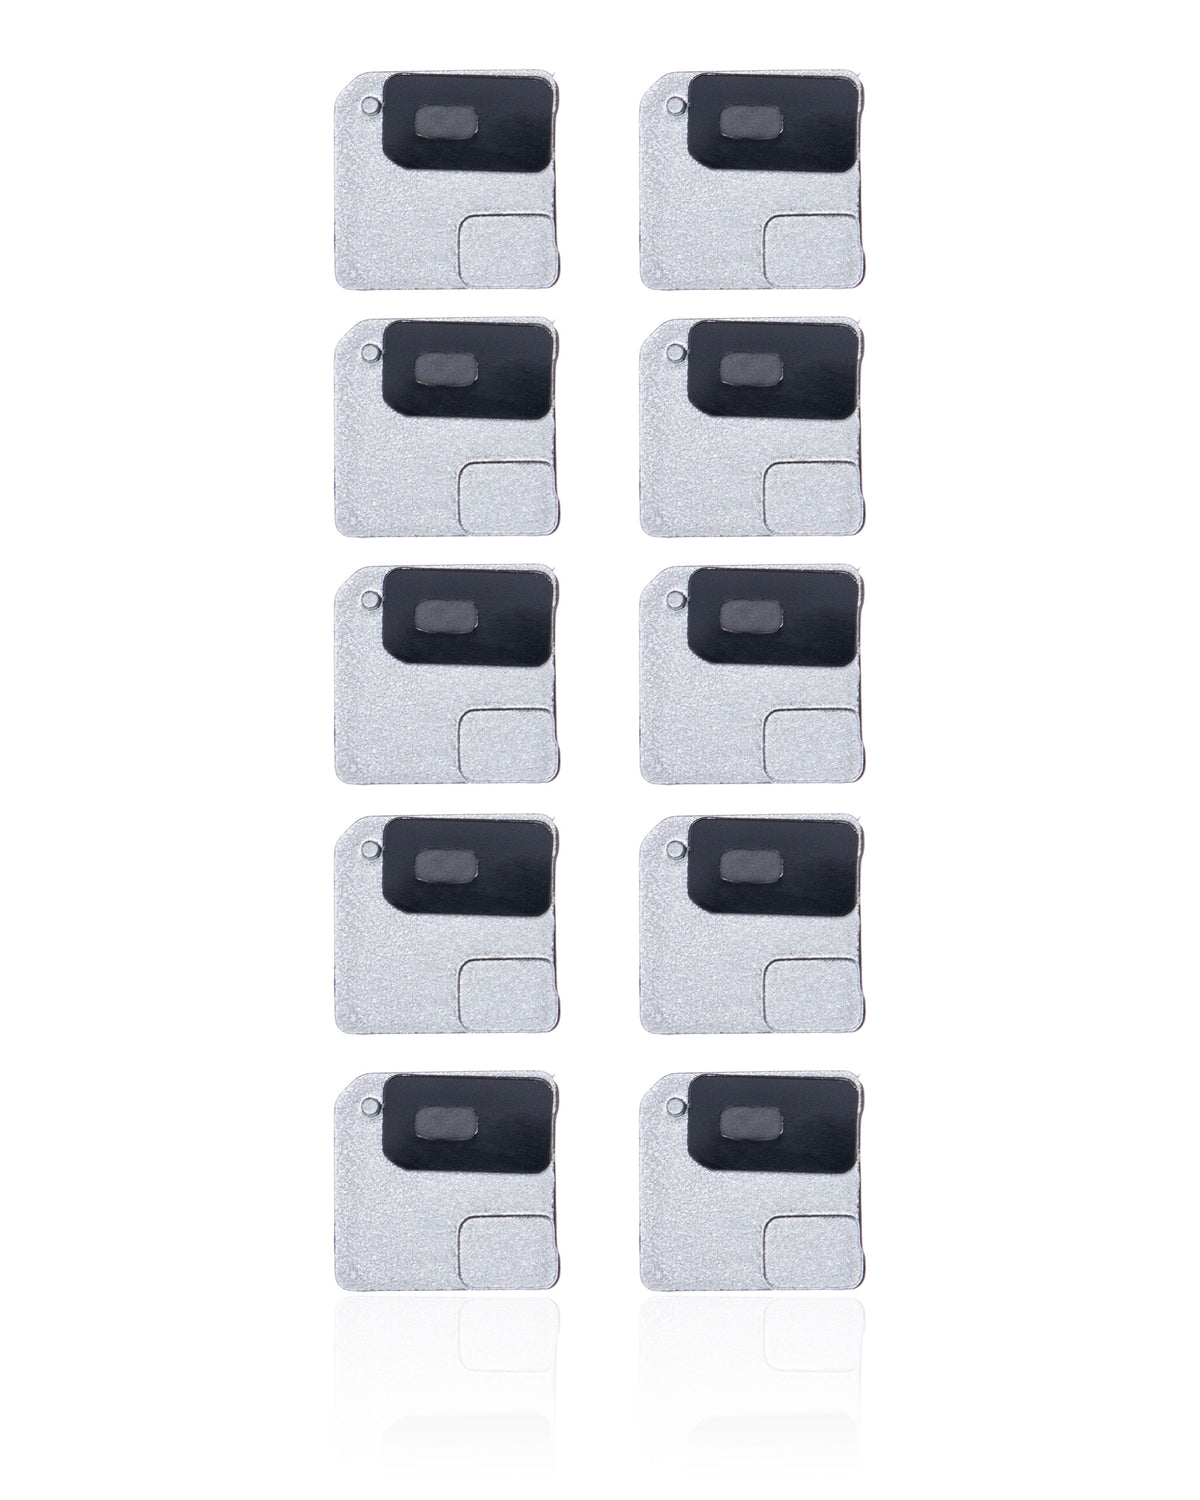 WHITE - FLASH LIGHT / POWER FLEX BRACKET WITH MICROPHONE MESH FOR IPHONE 12 MINI (10 PACK)